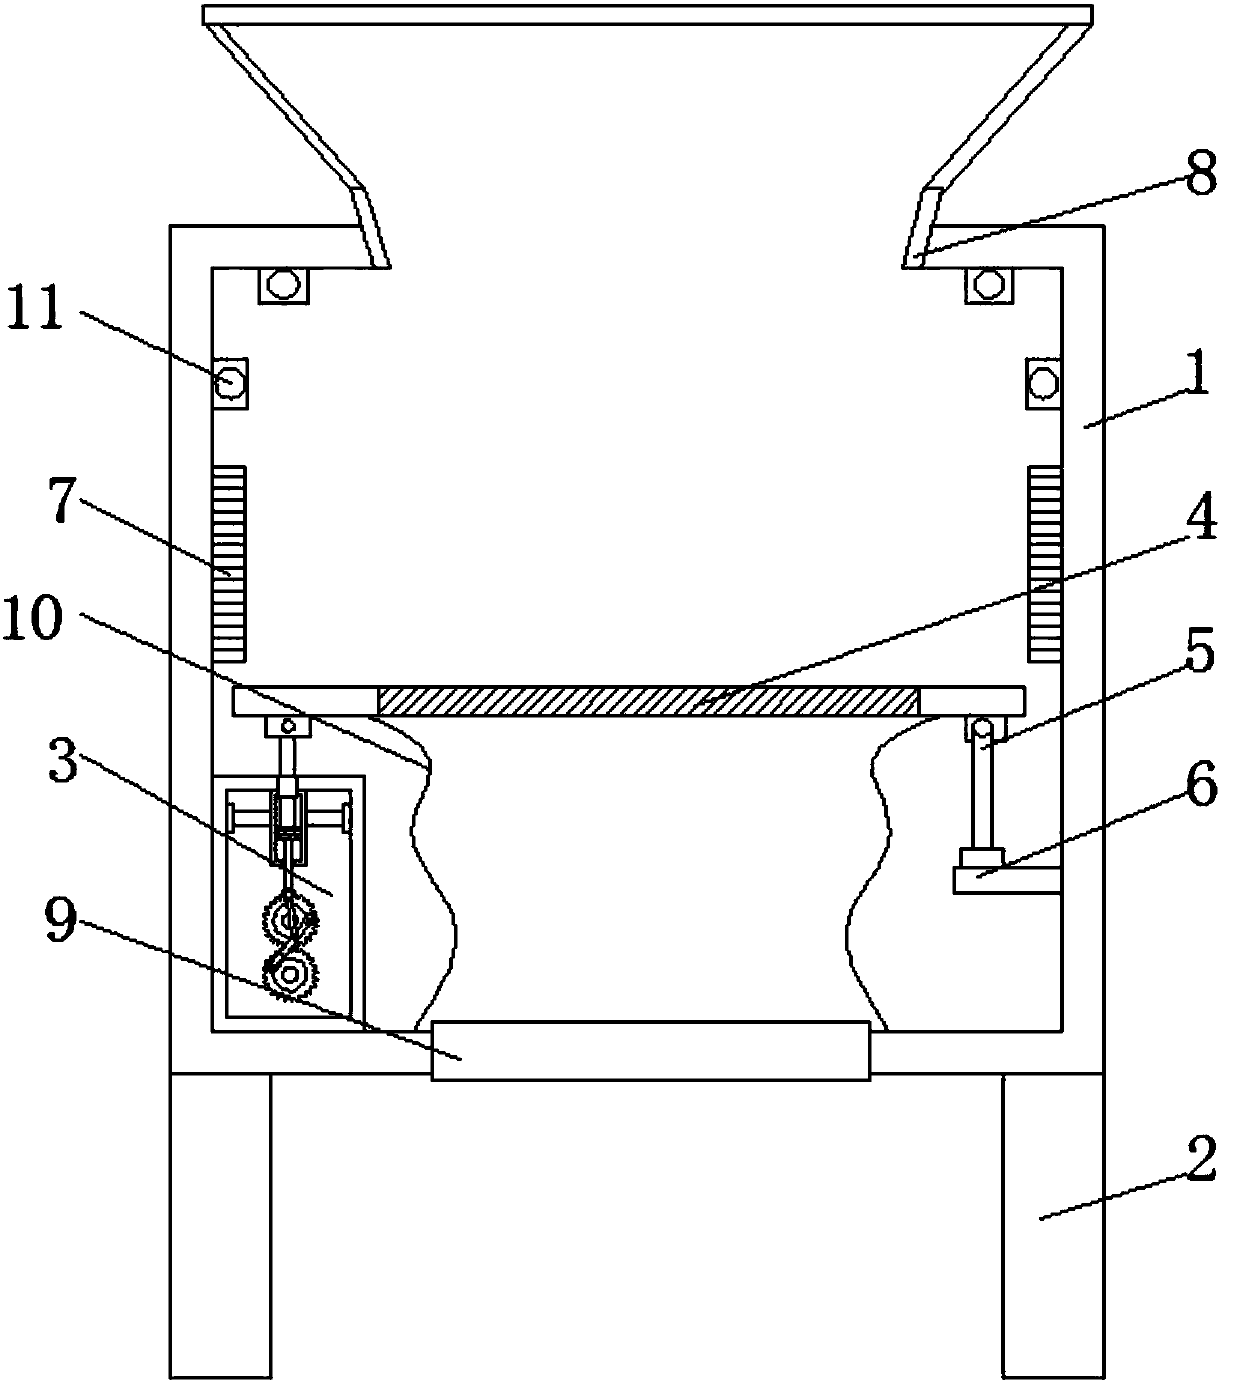 Sterilization device for pulverized medical waste